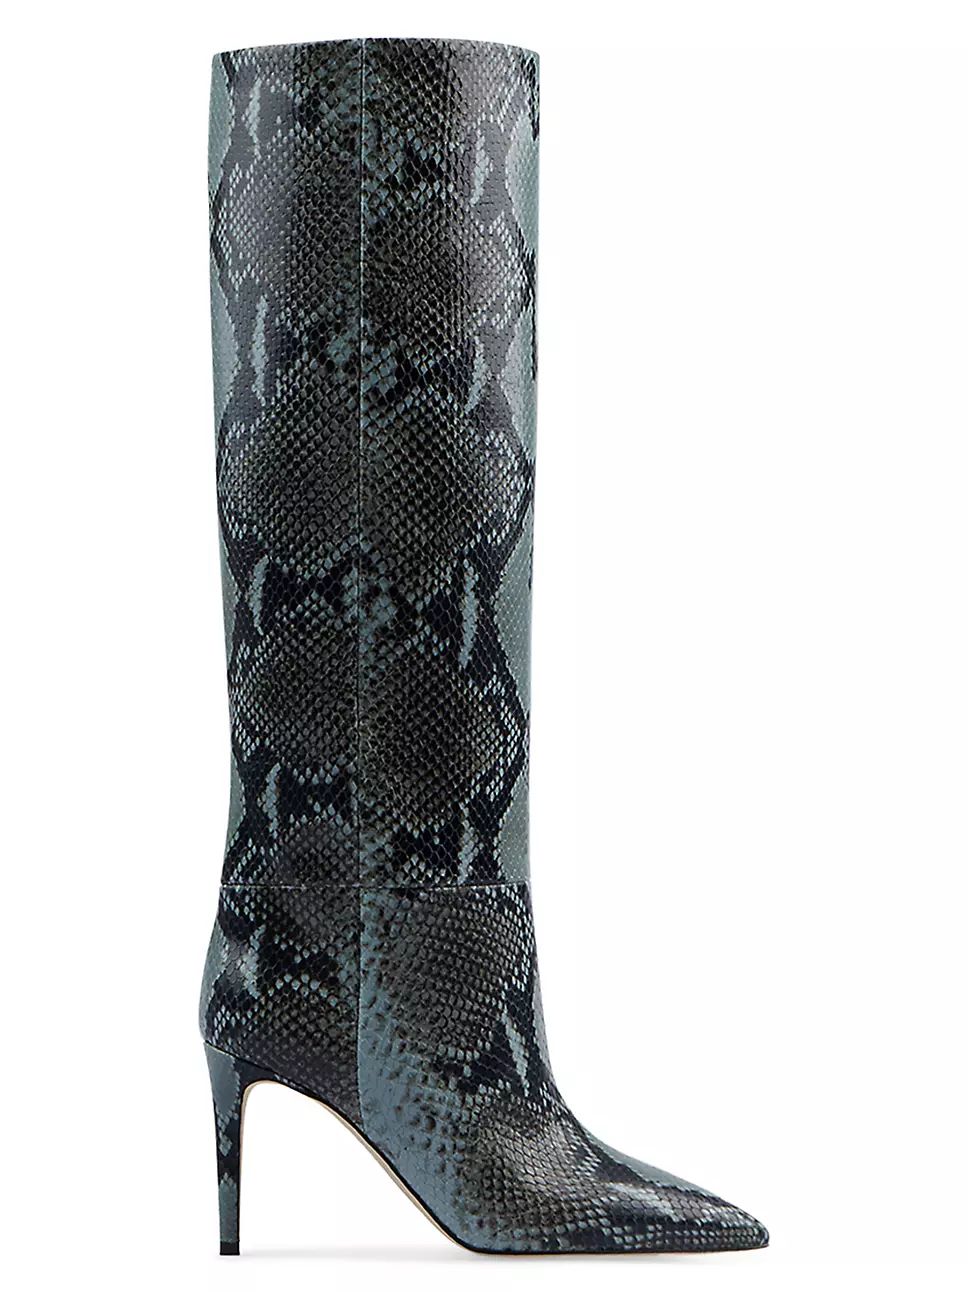 Knee-High Snakeskin-Embossed Leather Stiletto Boots | Saks Fifth Avenue